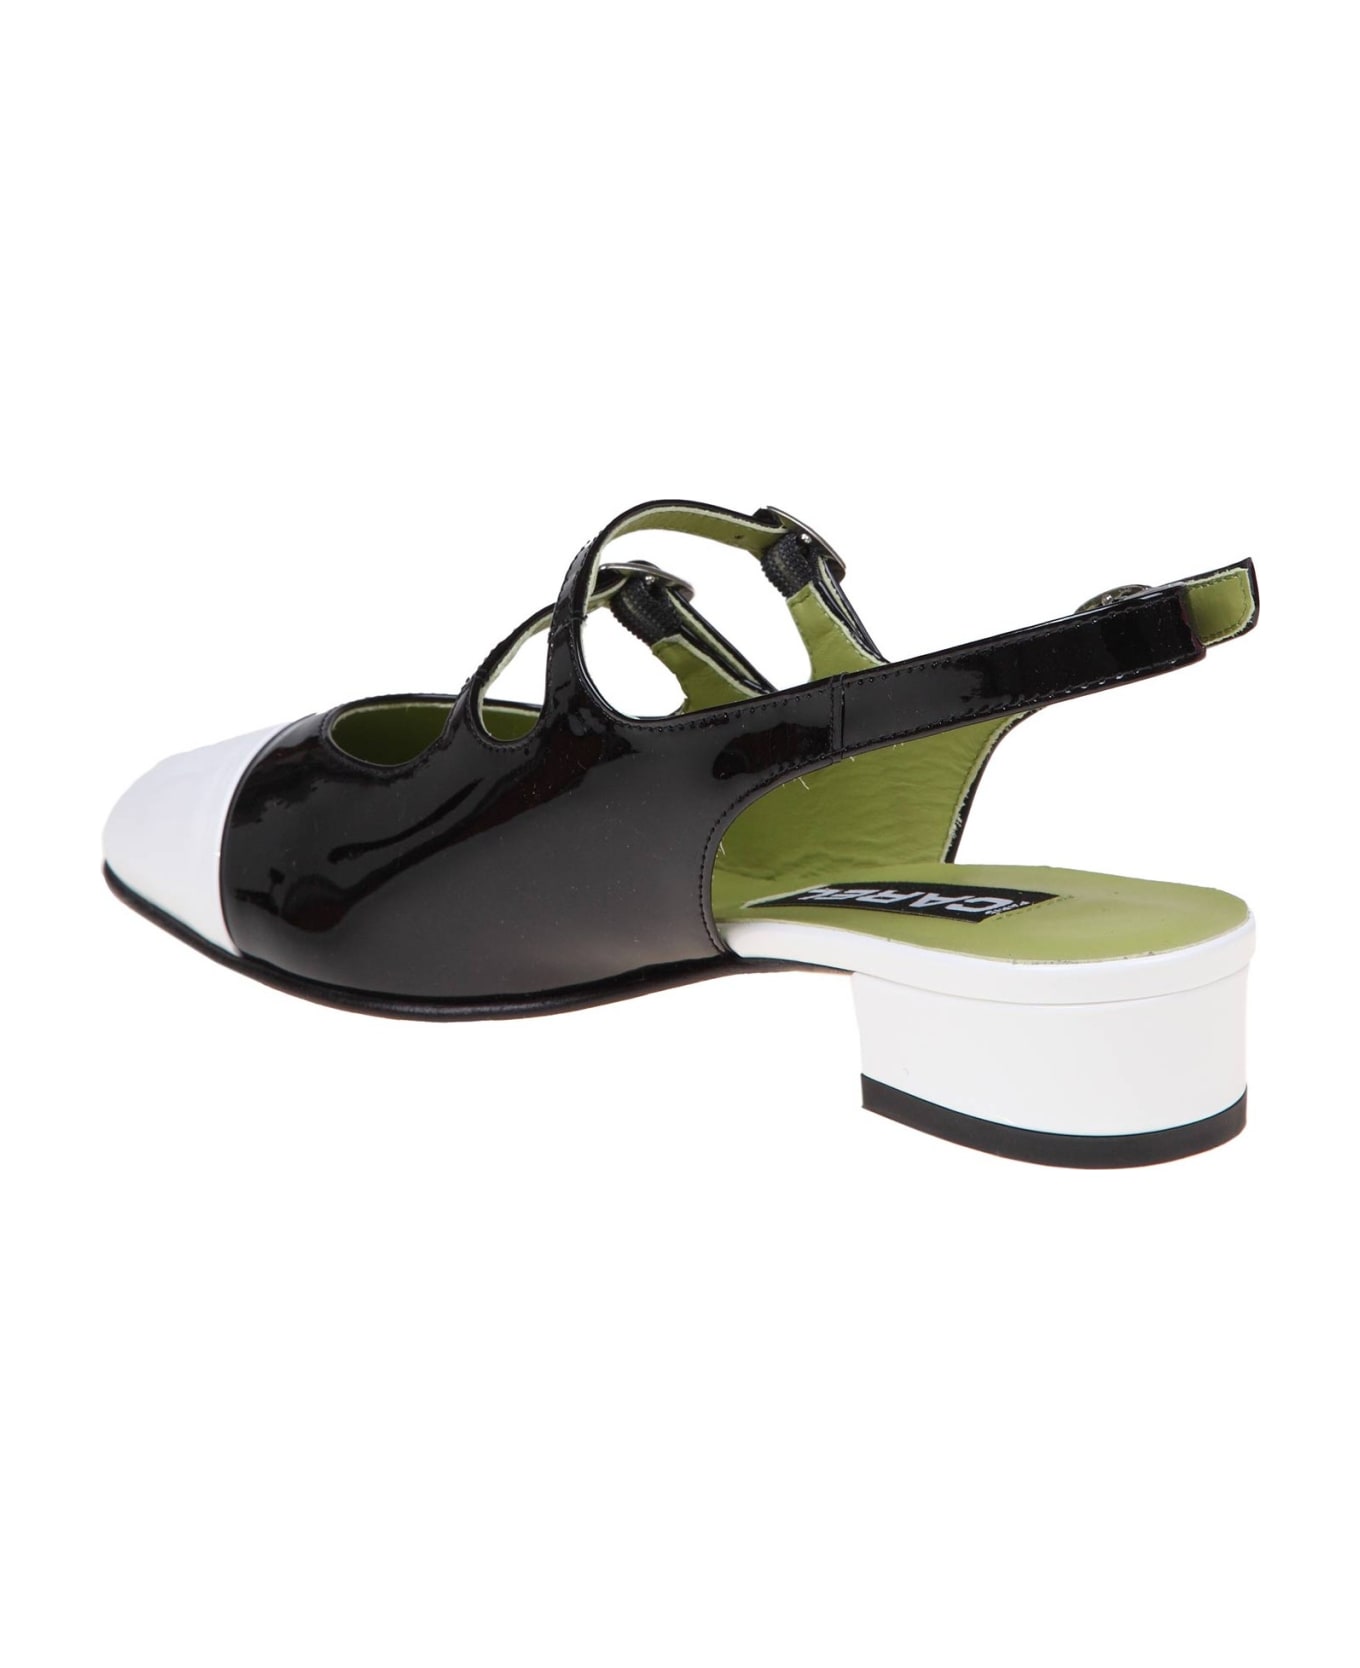 Carel Slingback In Black And White Patent Leather - BLACK/BLANC